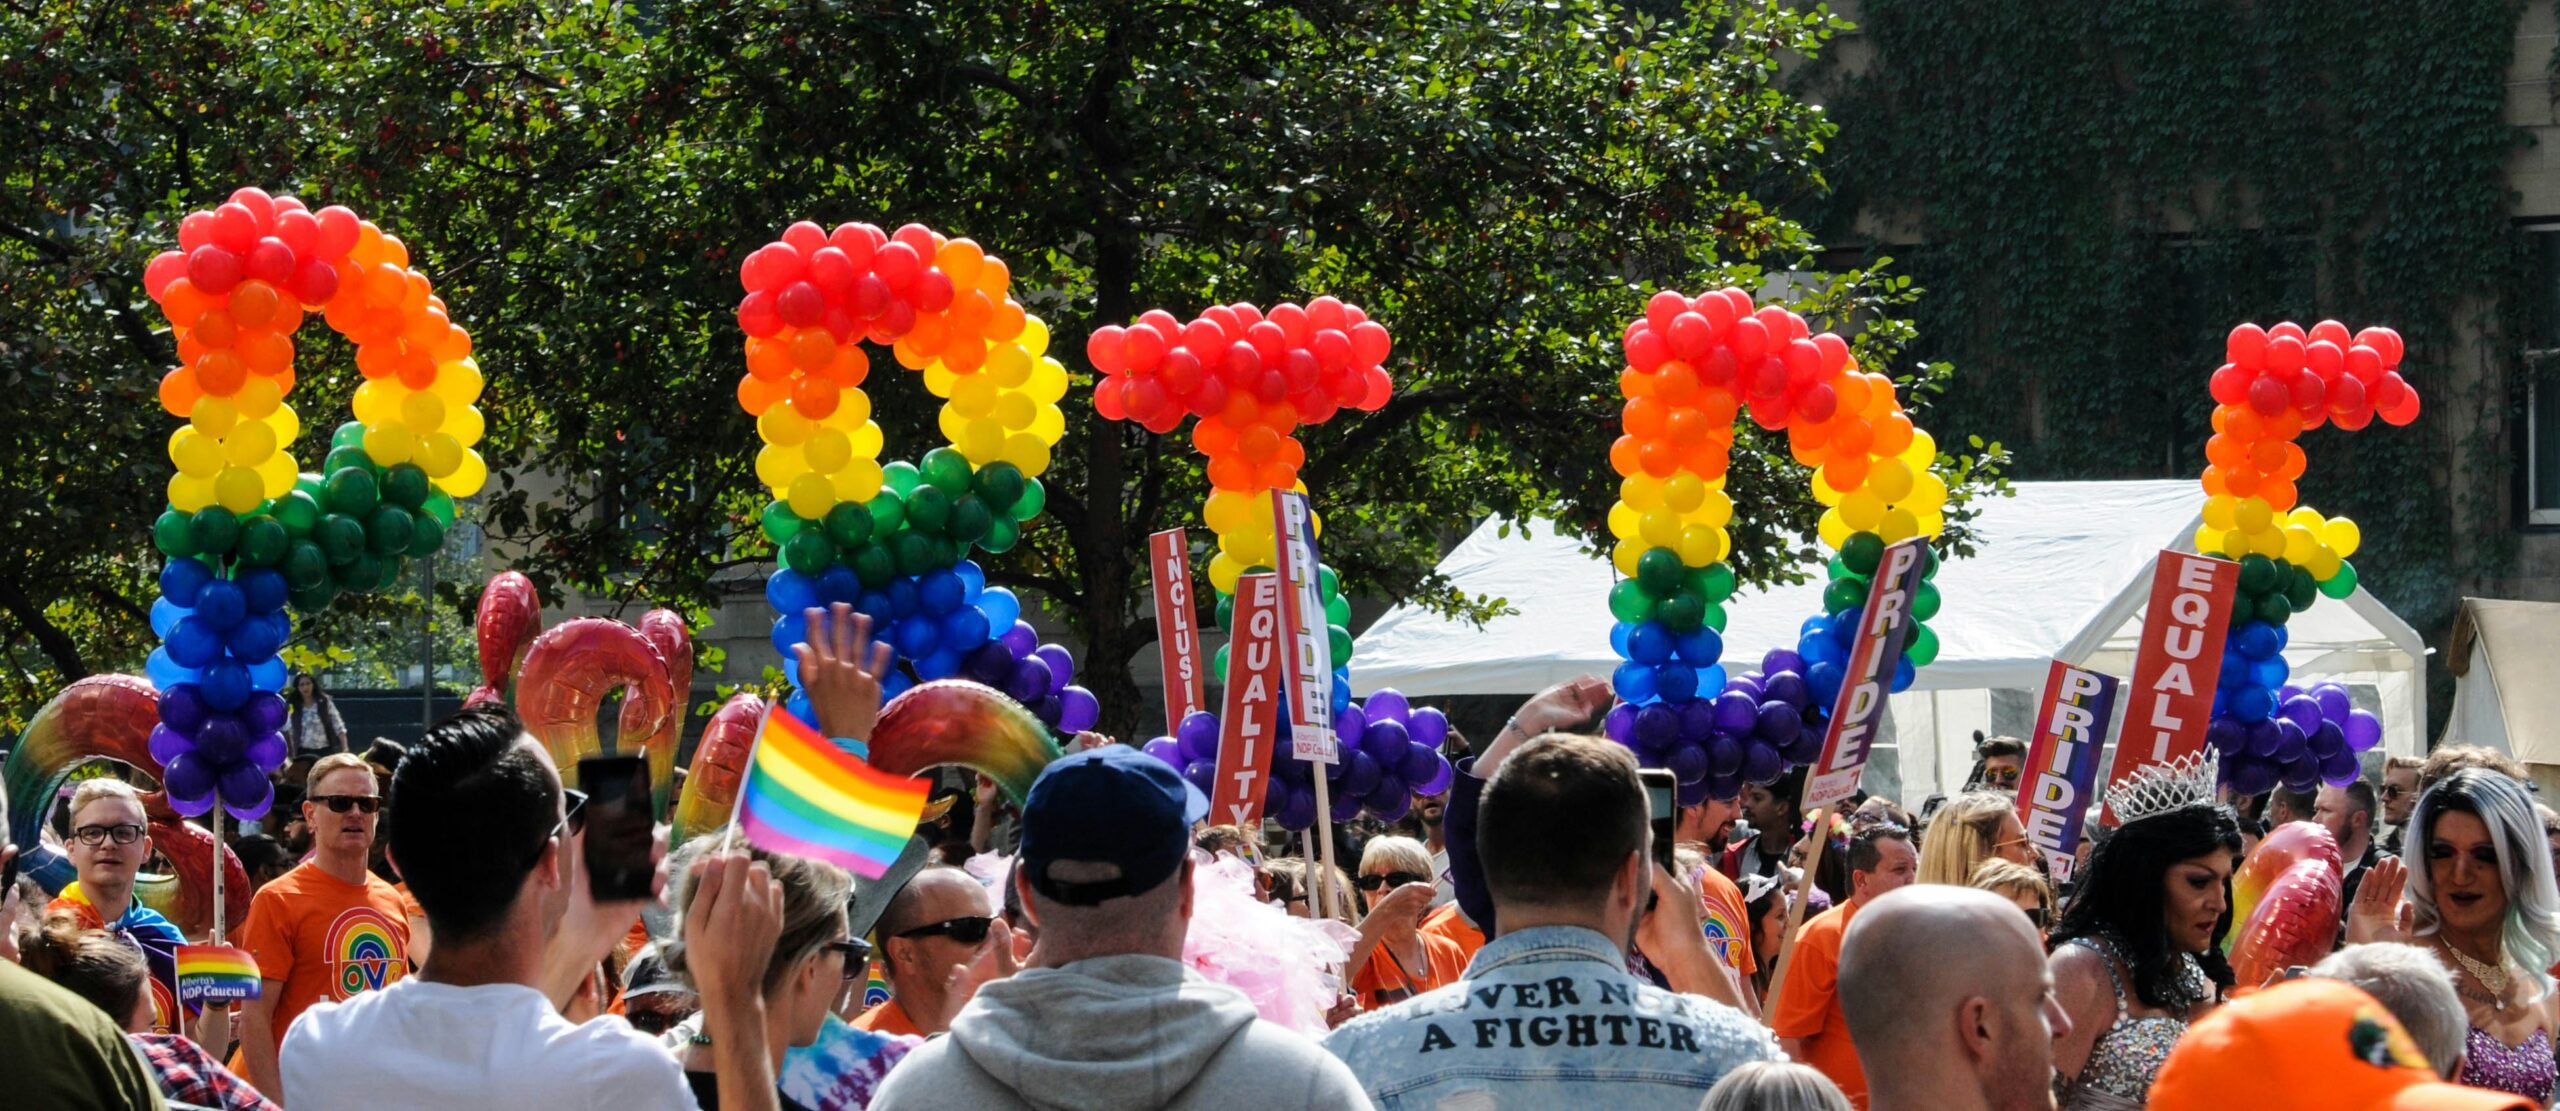 A group of people walking holding rainbow flags and the word "PRIDE" during a Pride parade.